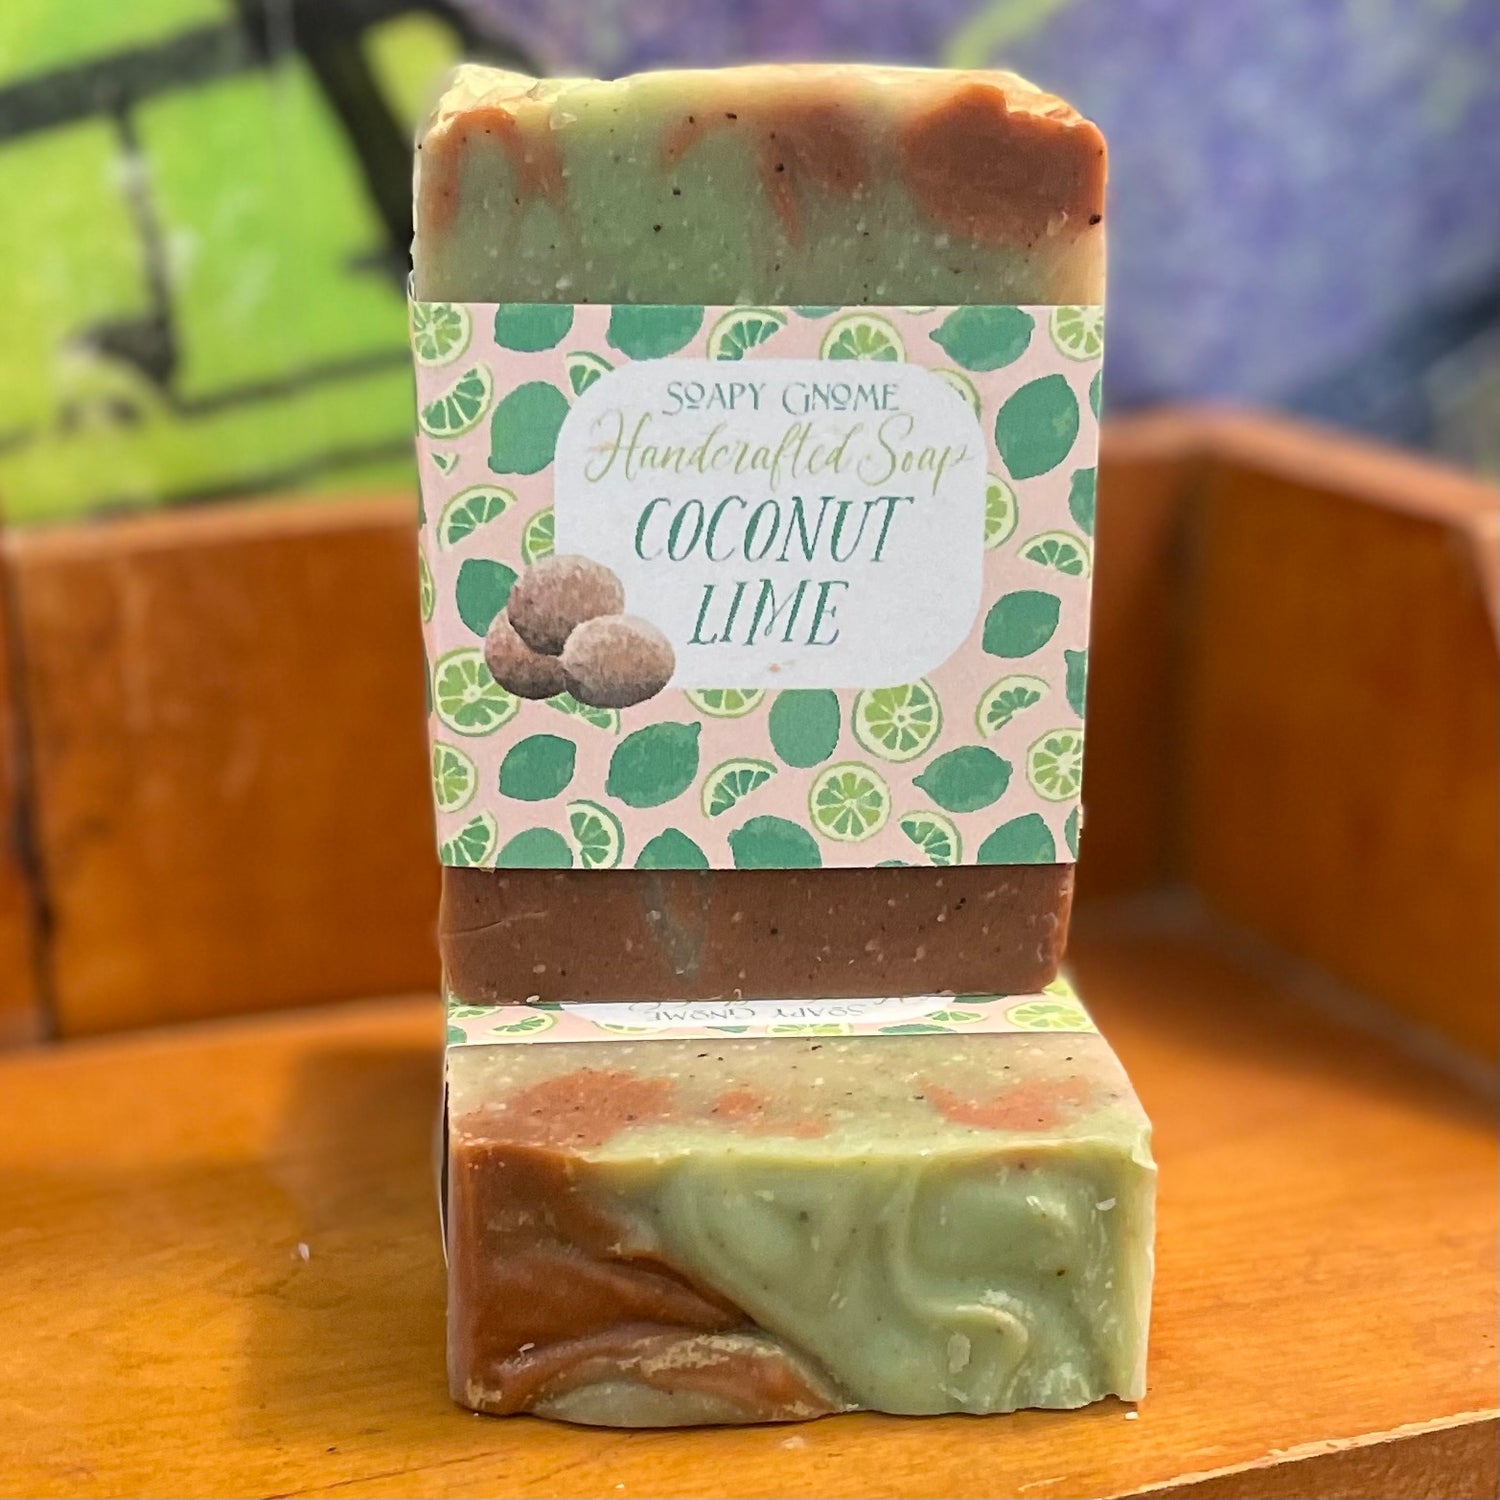 Scent of the Month Soap